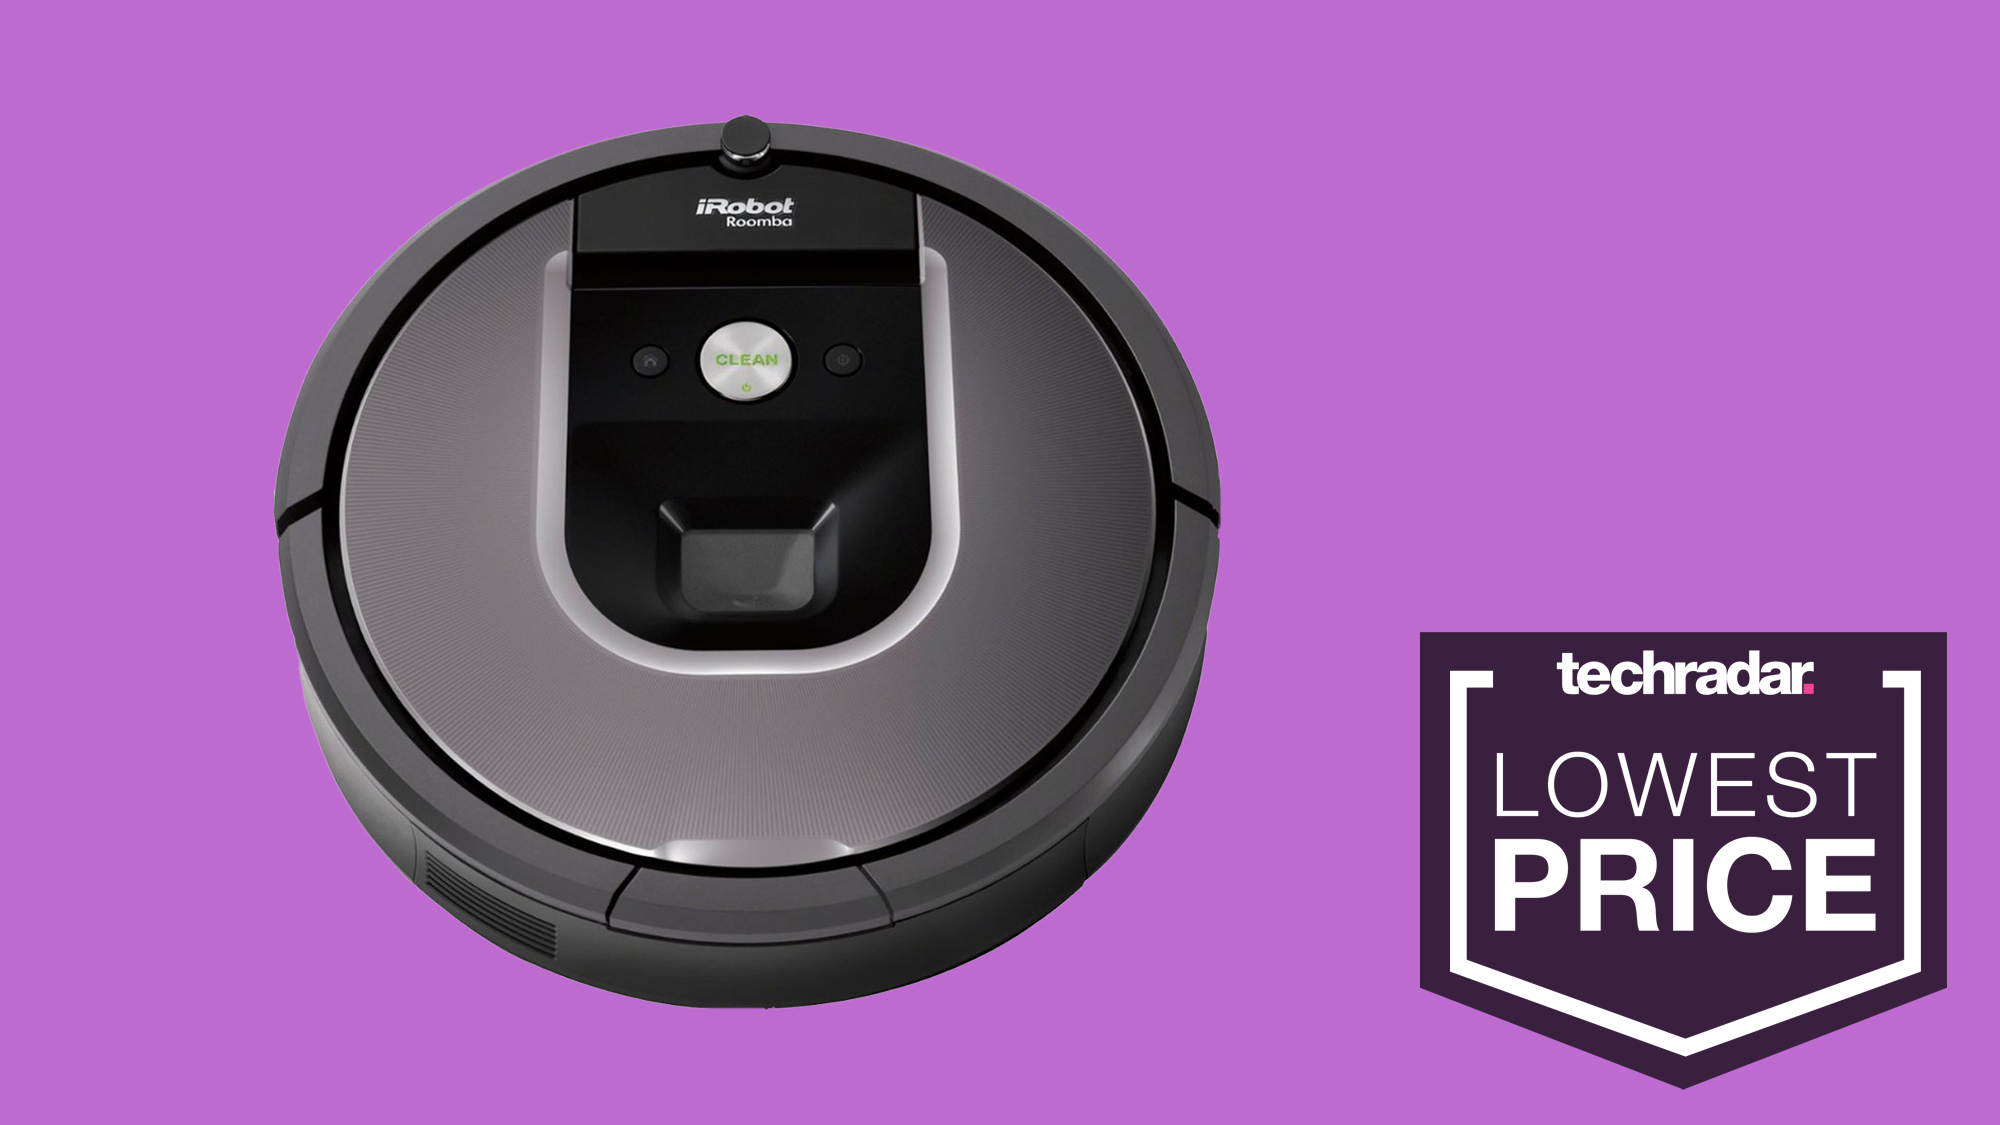 Take the iRobot Roomba 960 WiFi home for 250 less this Black Friday